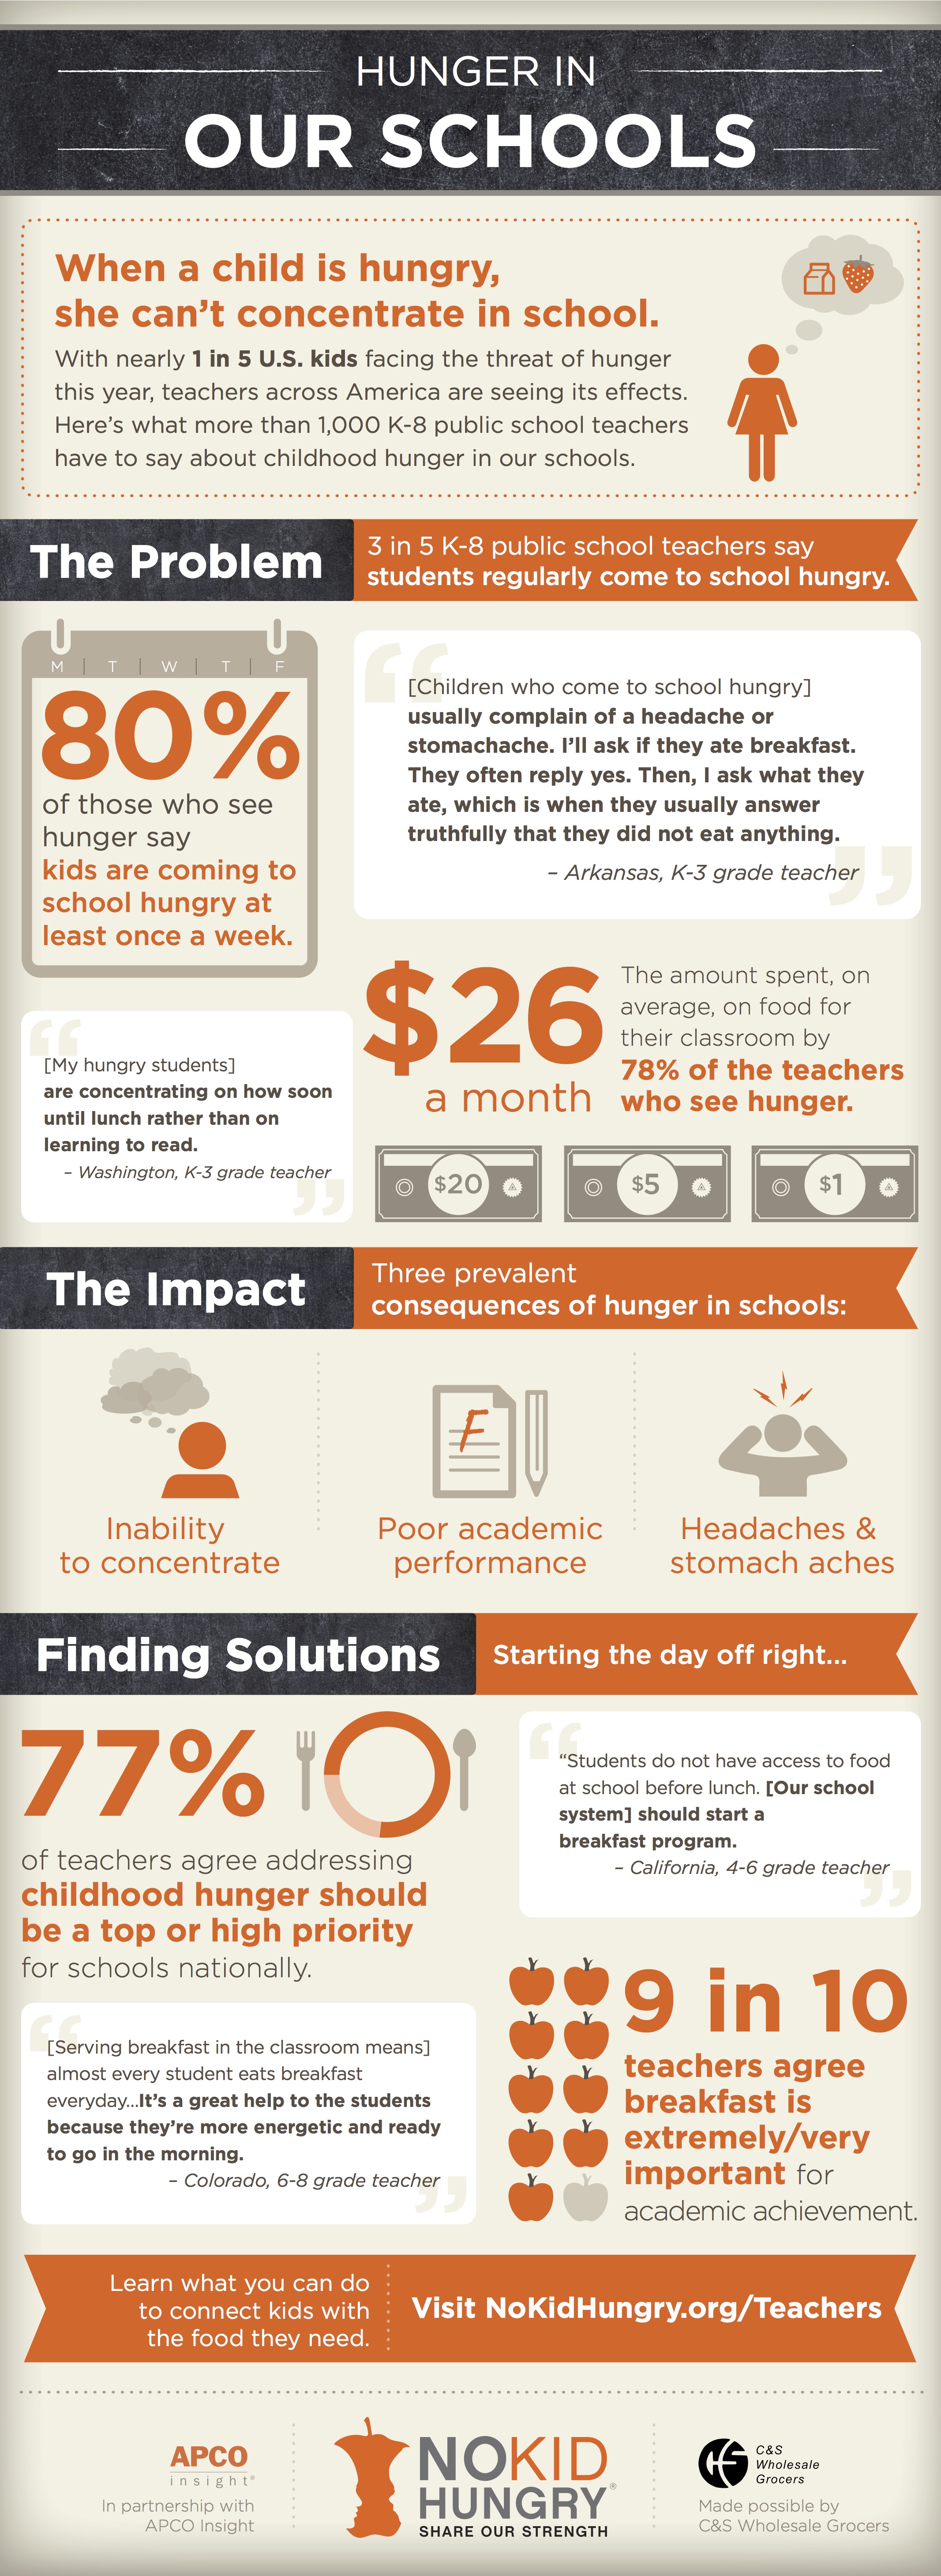 Infographic on Hunger in Our Schools